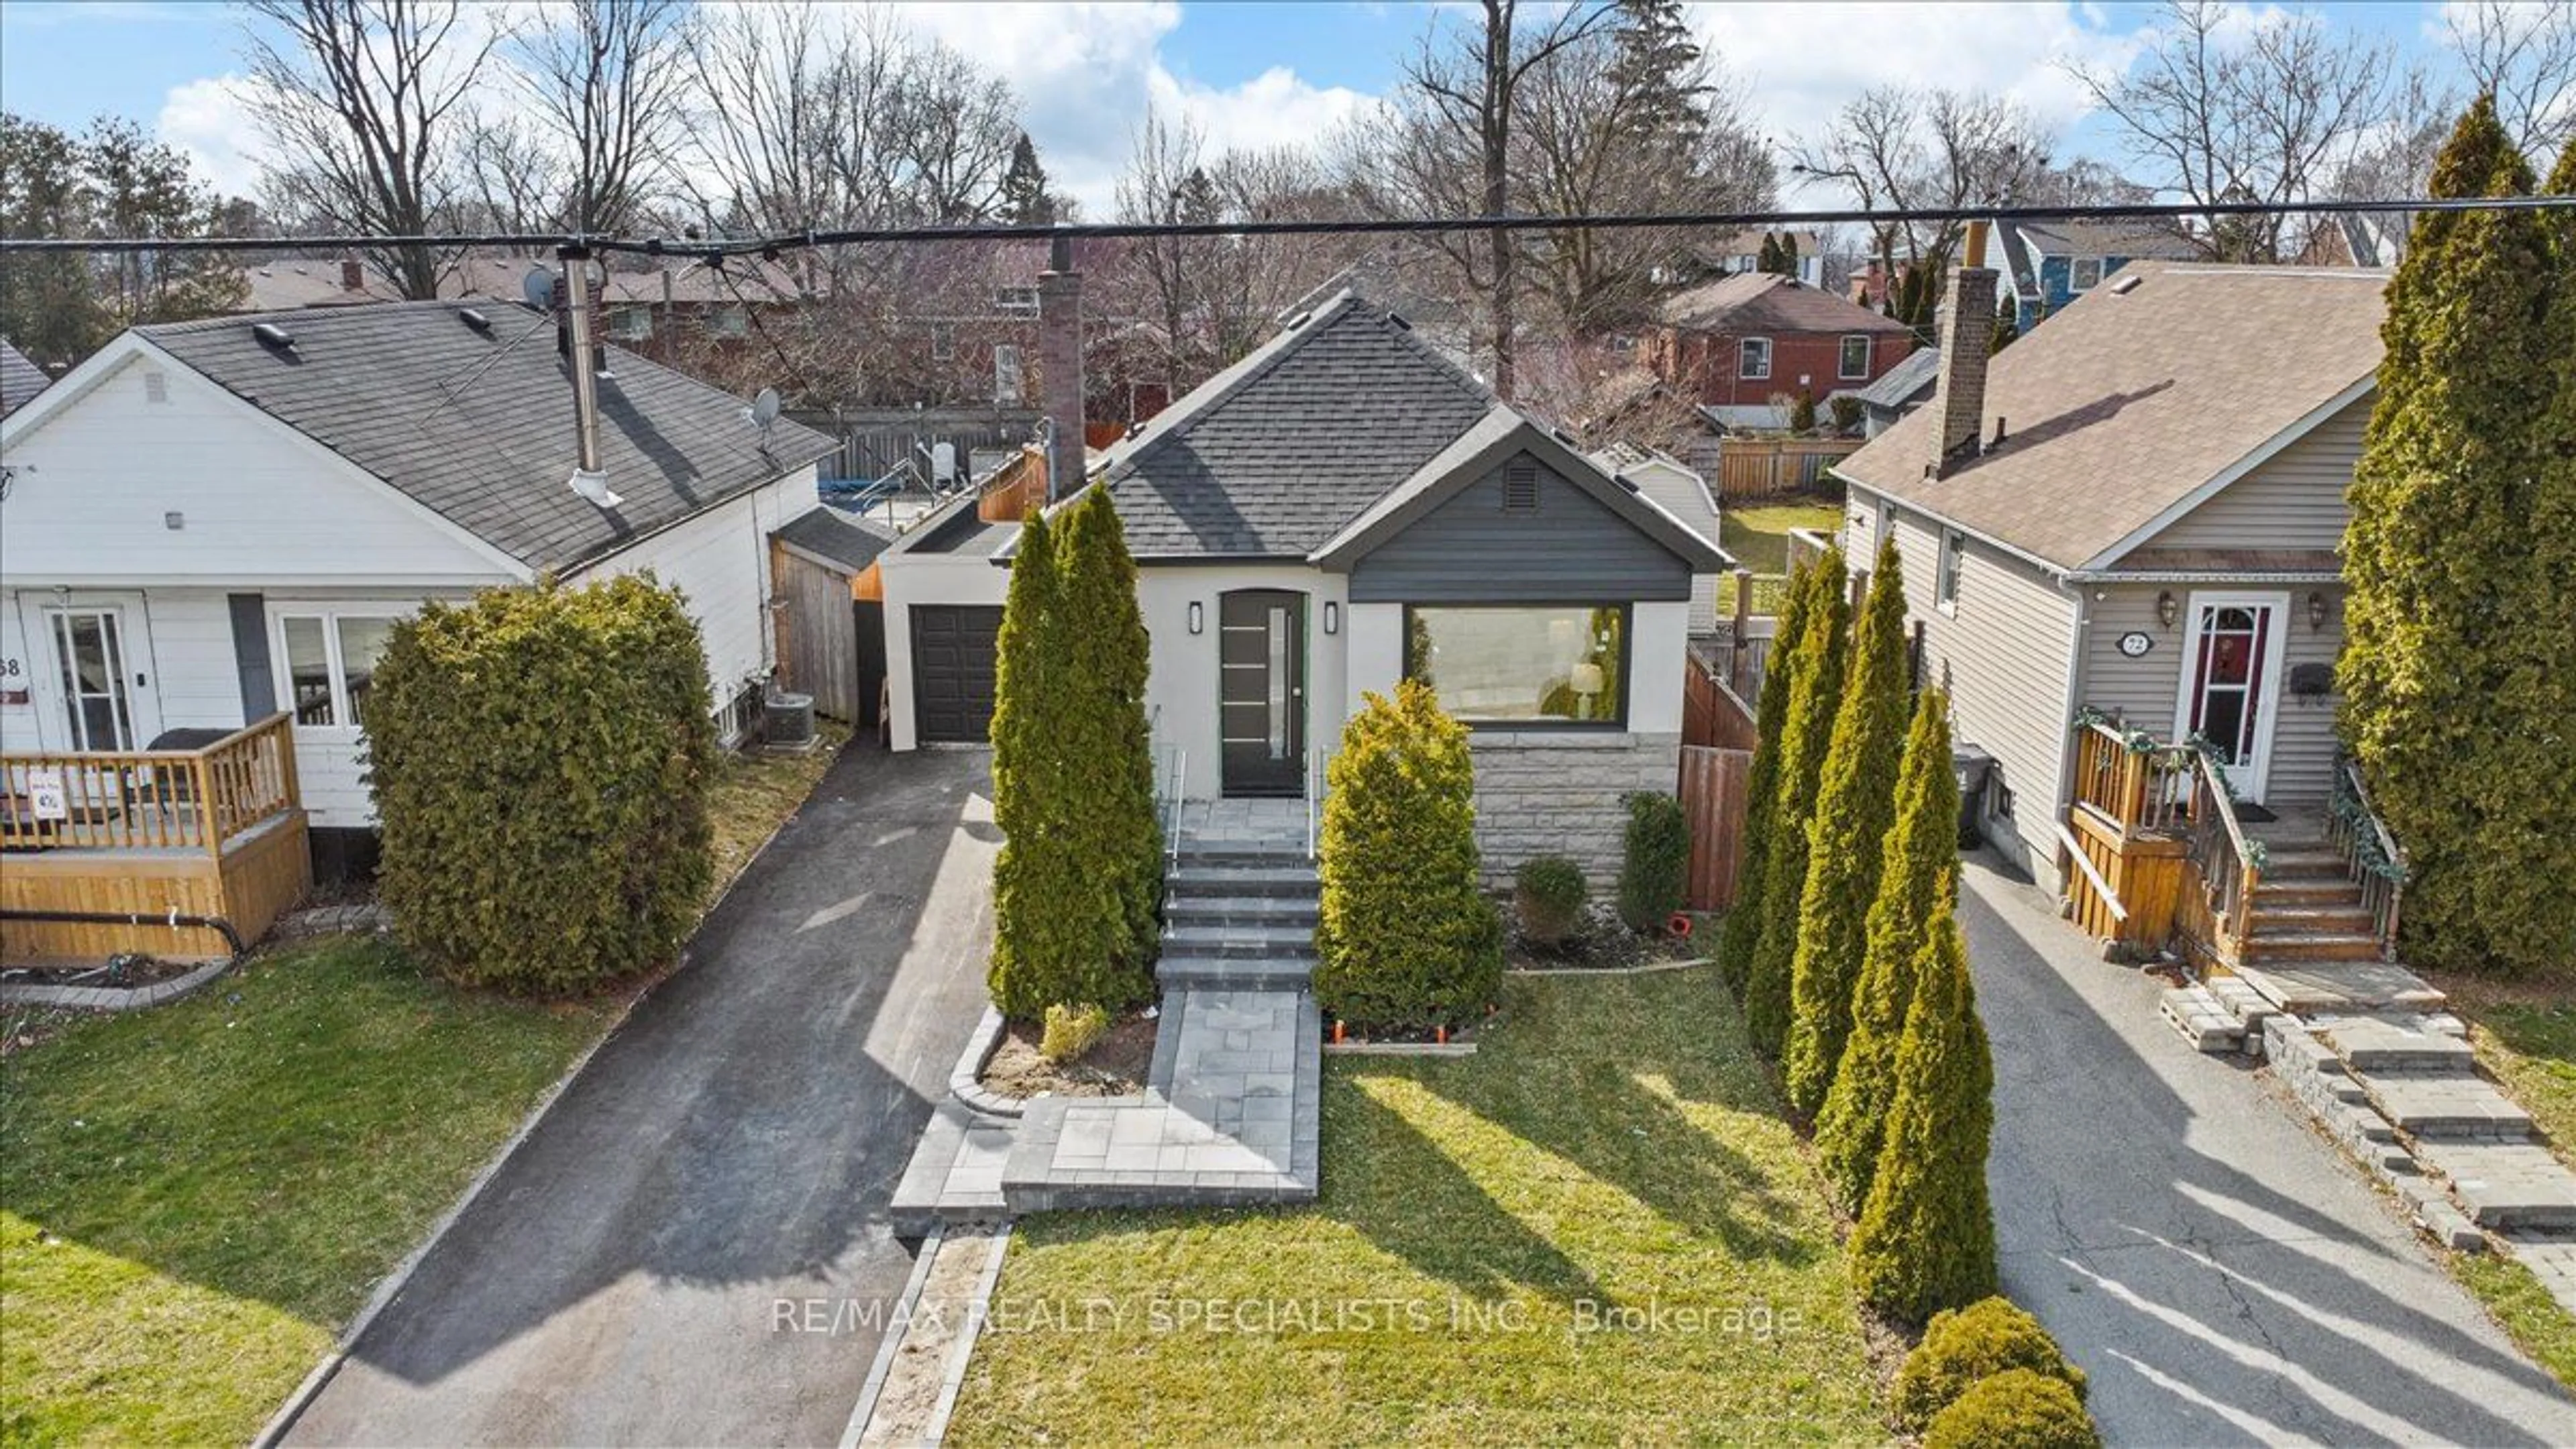 Frontside or backside of a home for 70 Atlee Ave, Toronto Ontario M1N 3X2